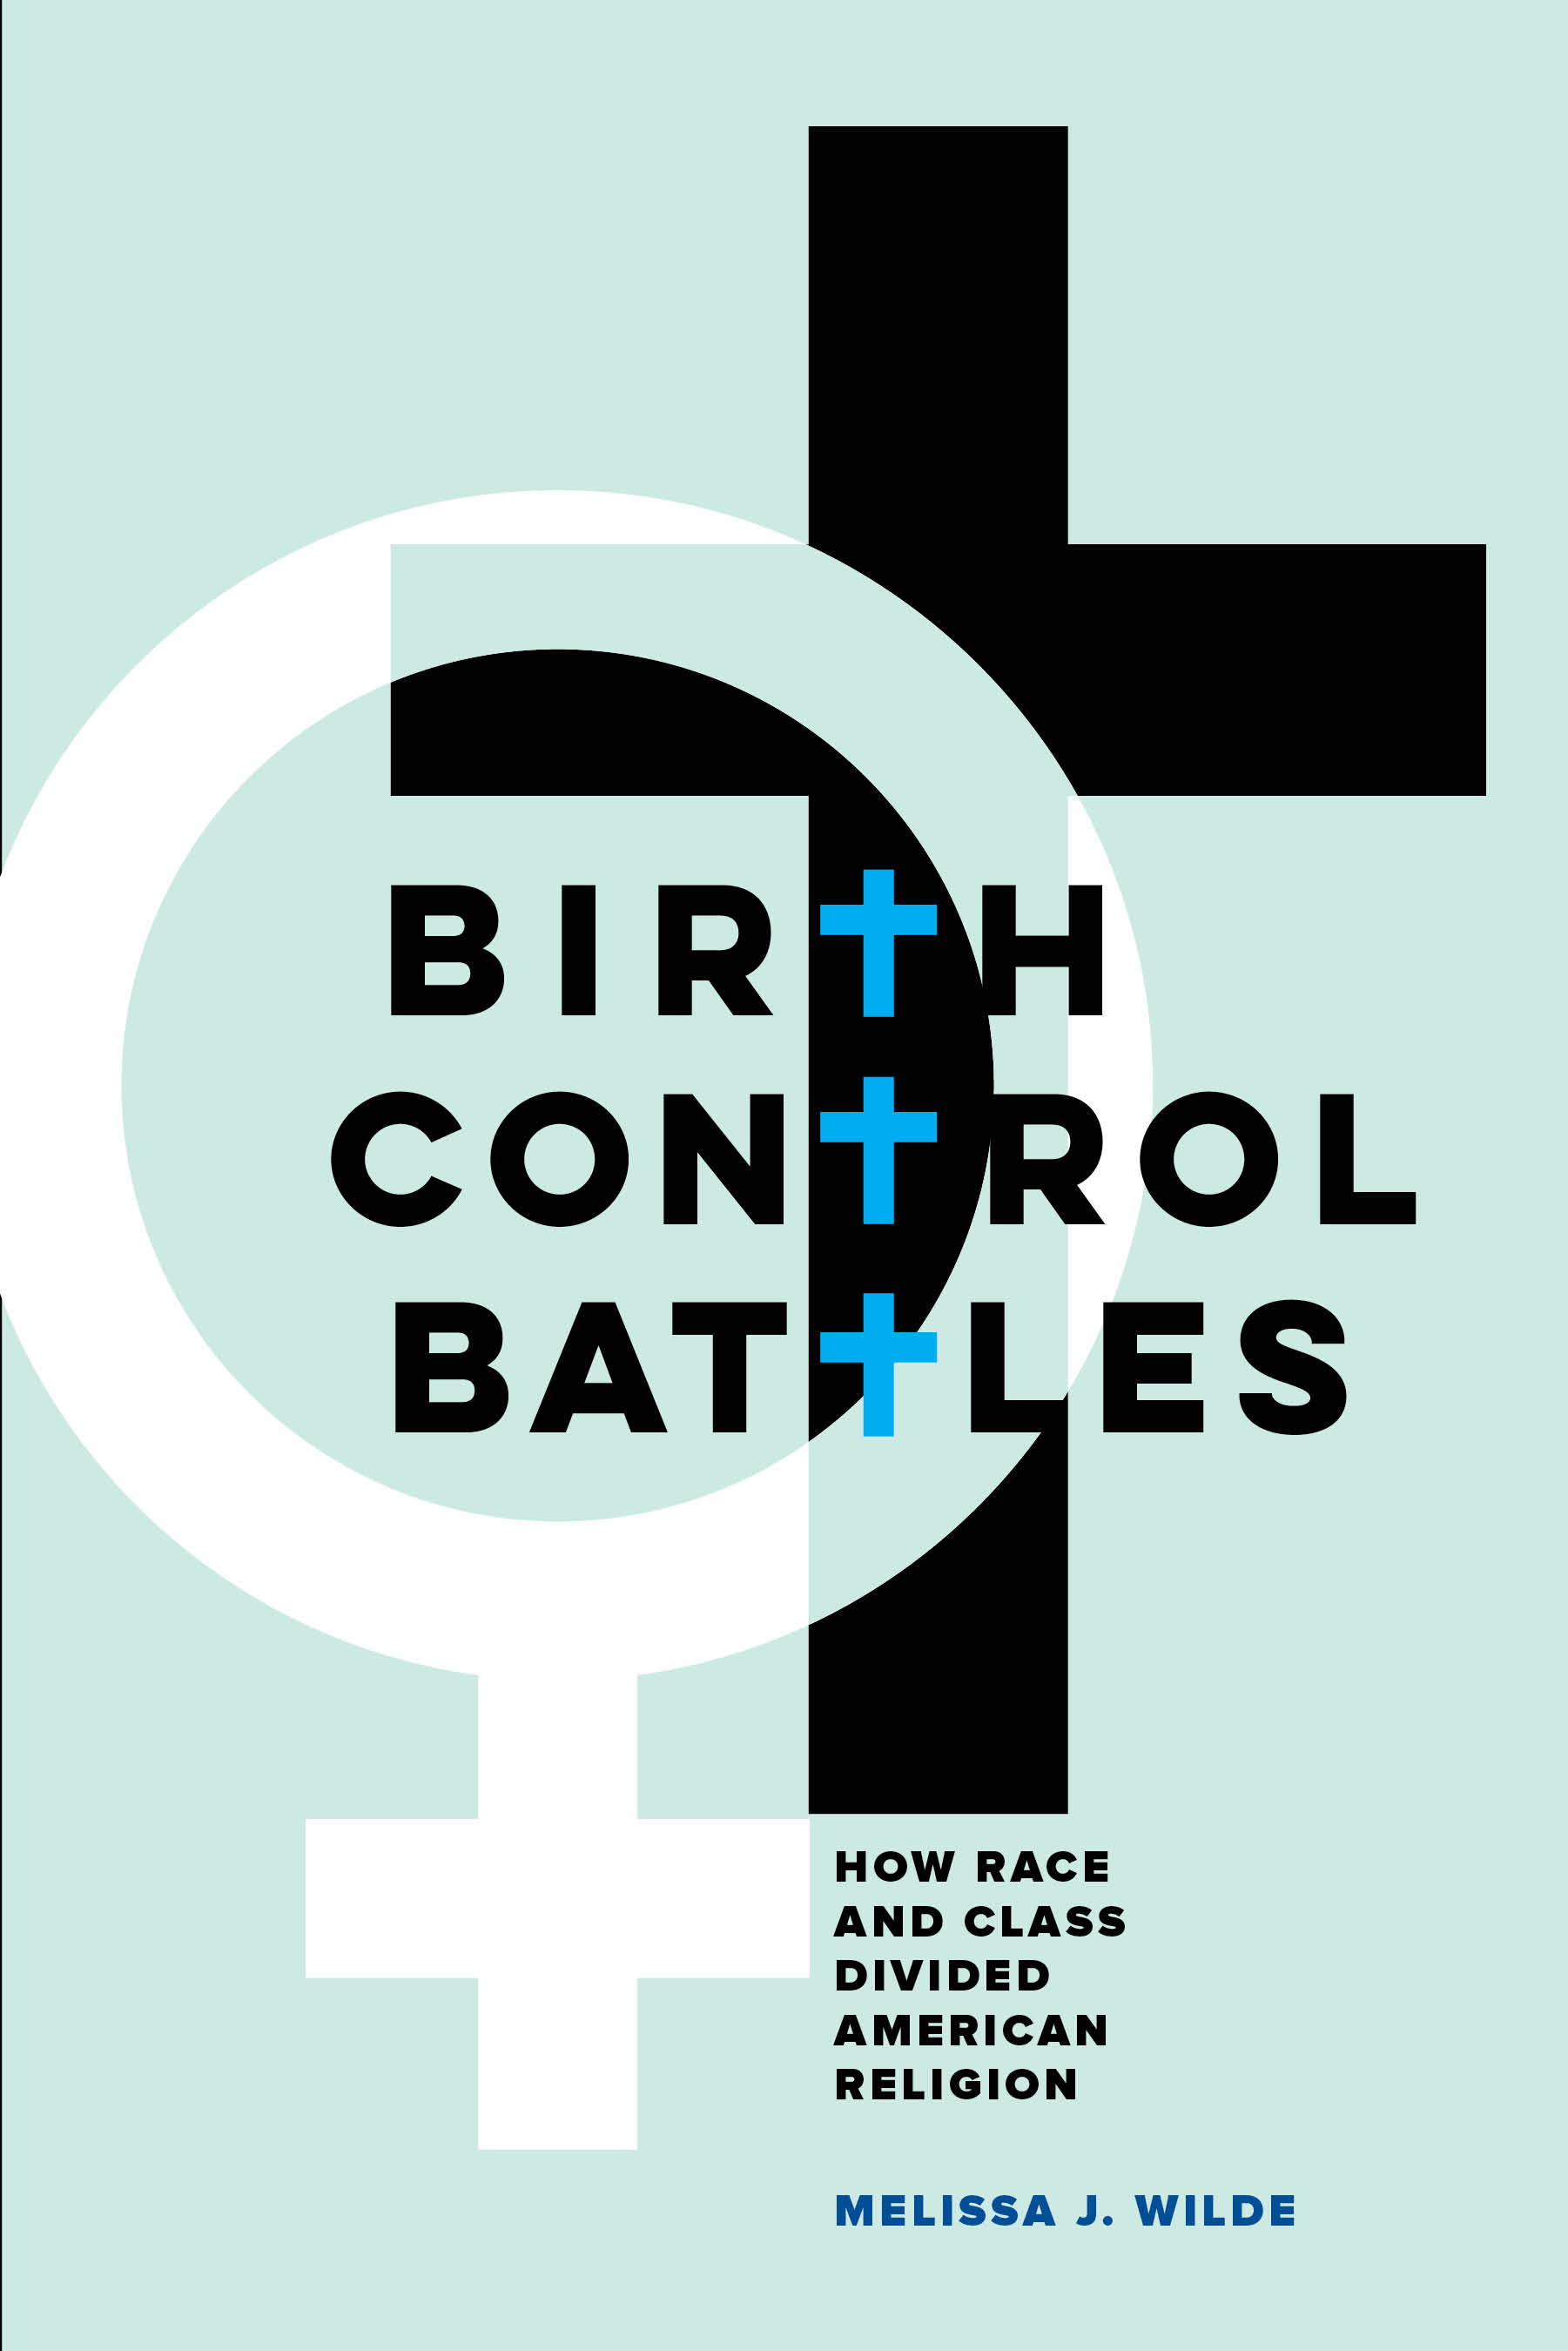 Book cover with the words "Birth Control Battles: How Race and Class Divided American Religion." Melissa J. Wilde